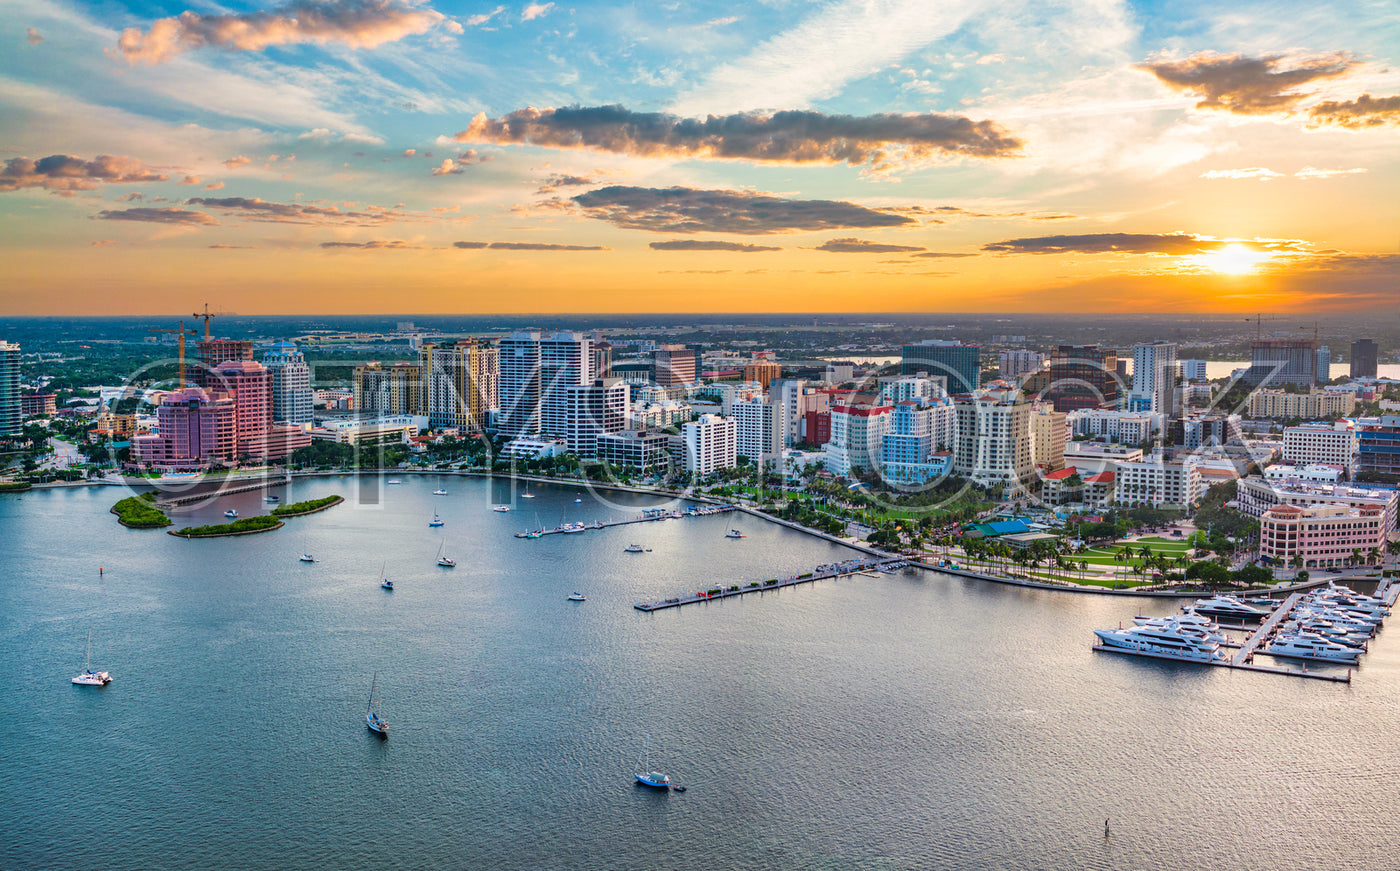 Aerial view of West Palm Beach skyline and waterfront at sunset